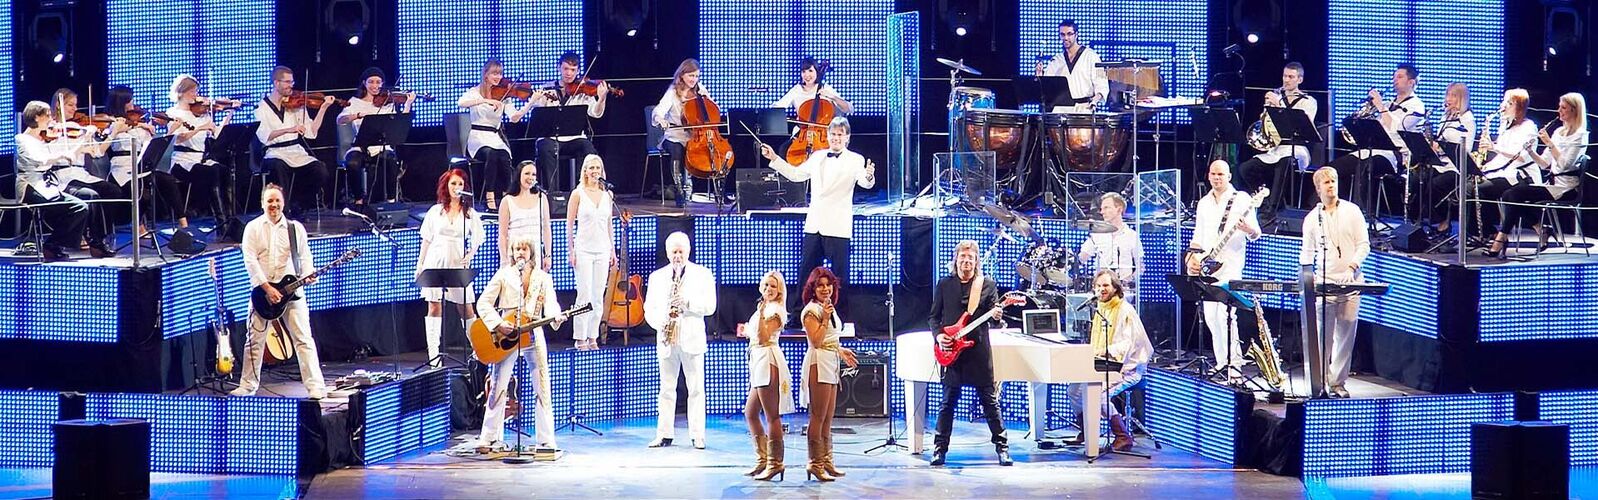 The Show - A Tribute To ABBA - 15. Februar 2023